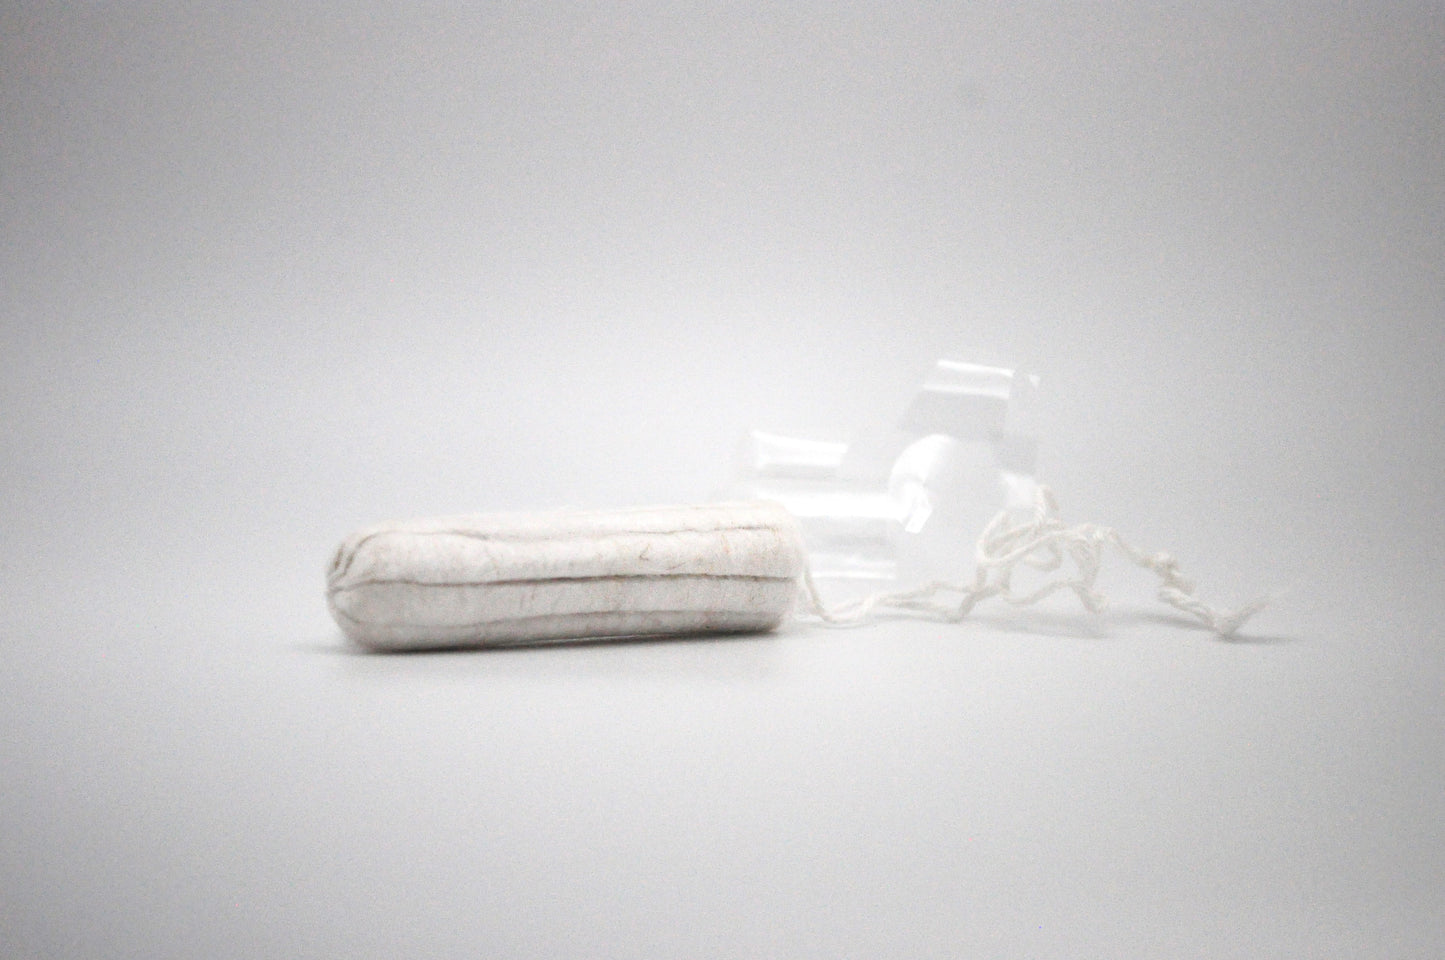 Hemp and Climate-Beneficial™ Cotton Tampons - NOW GROWING...